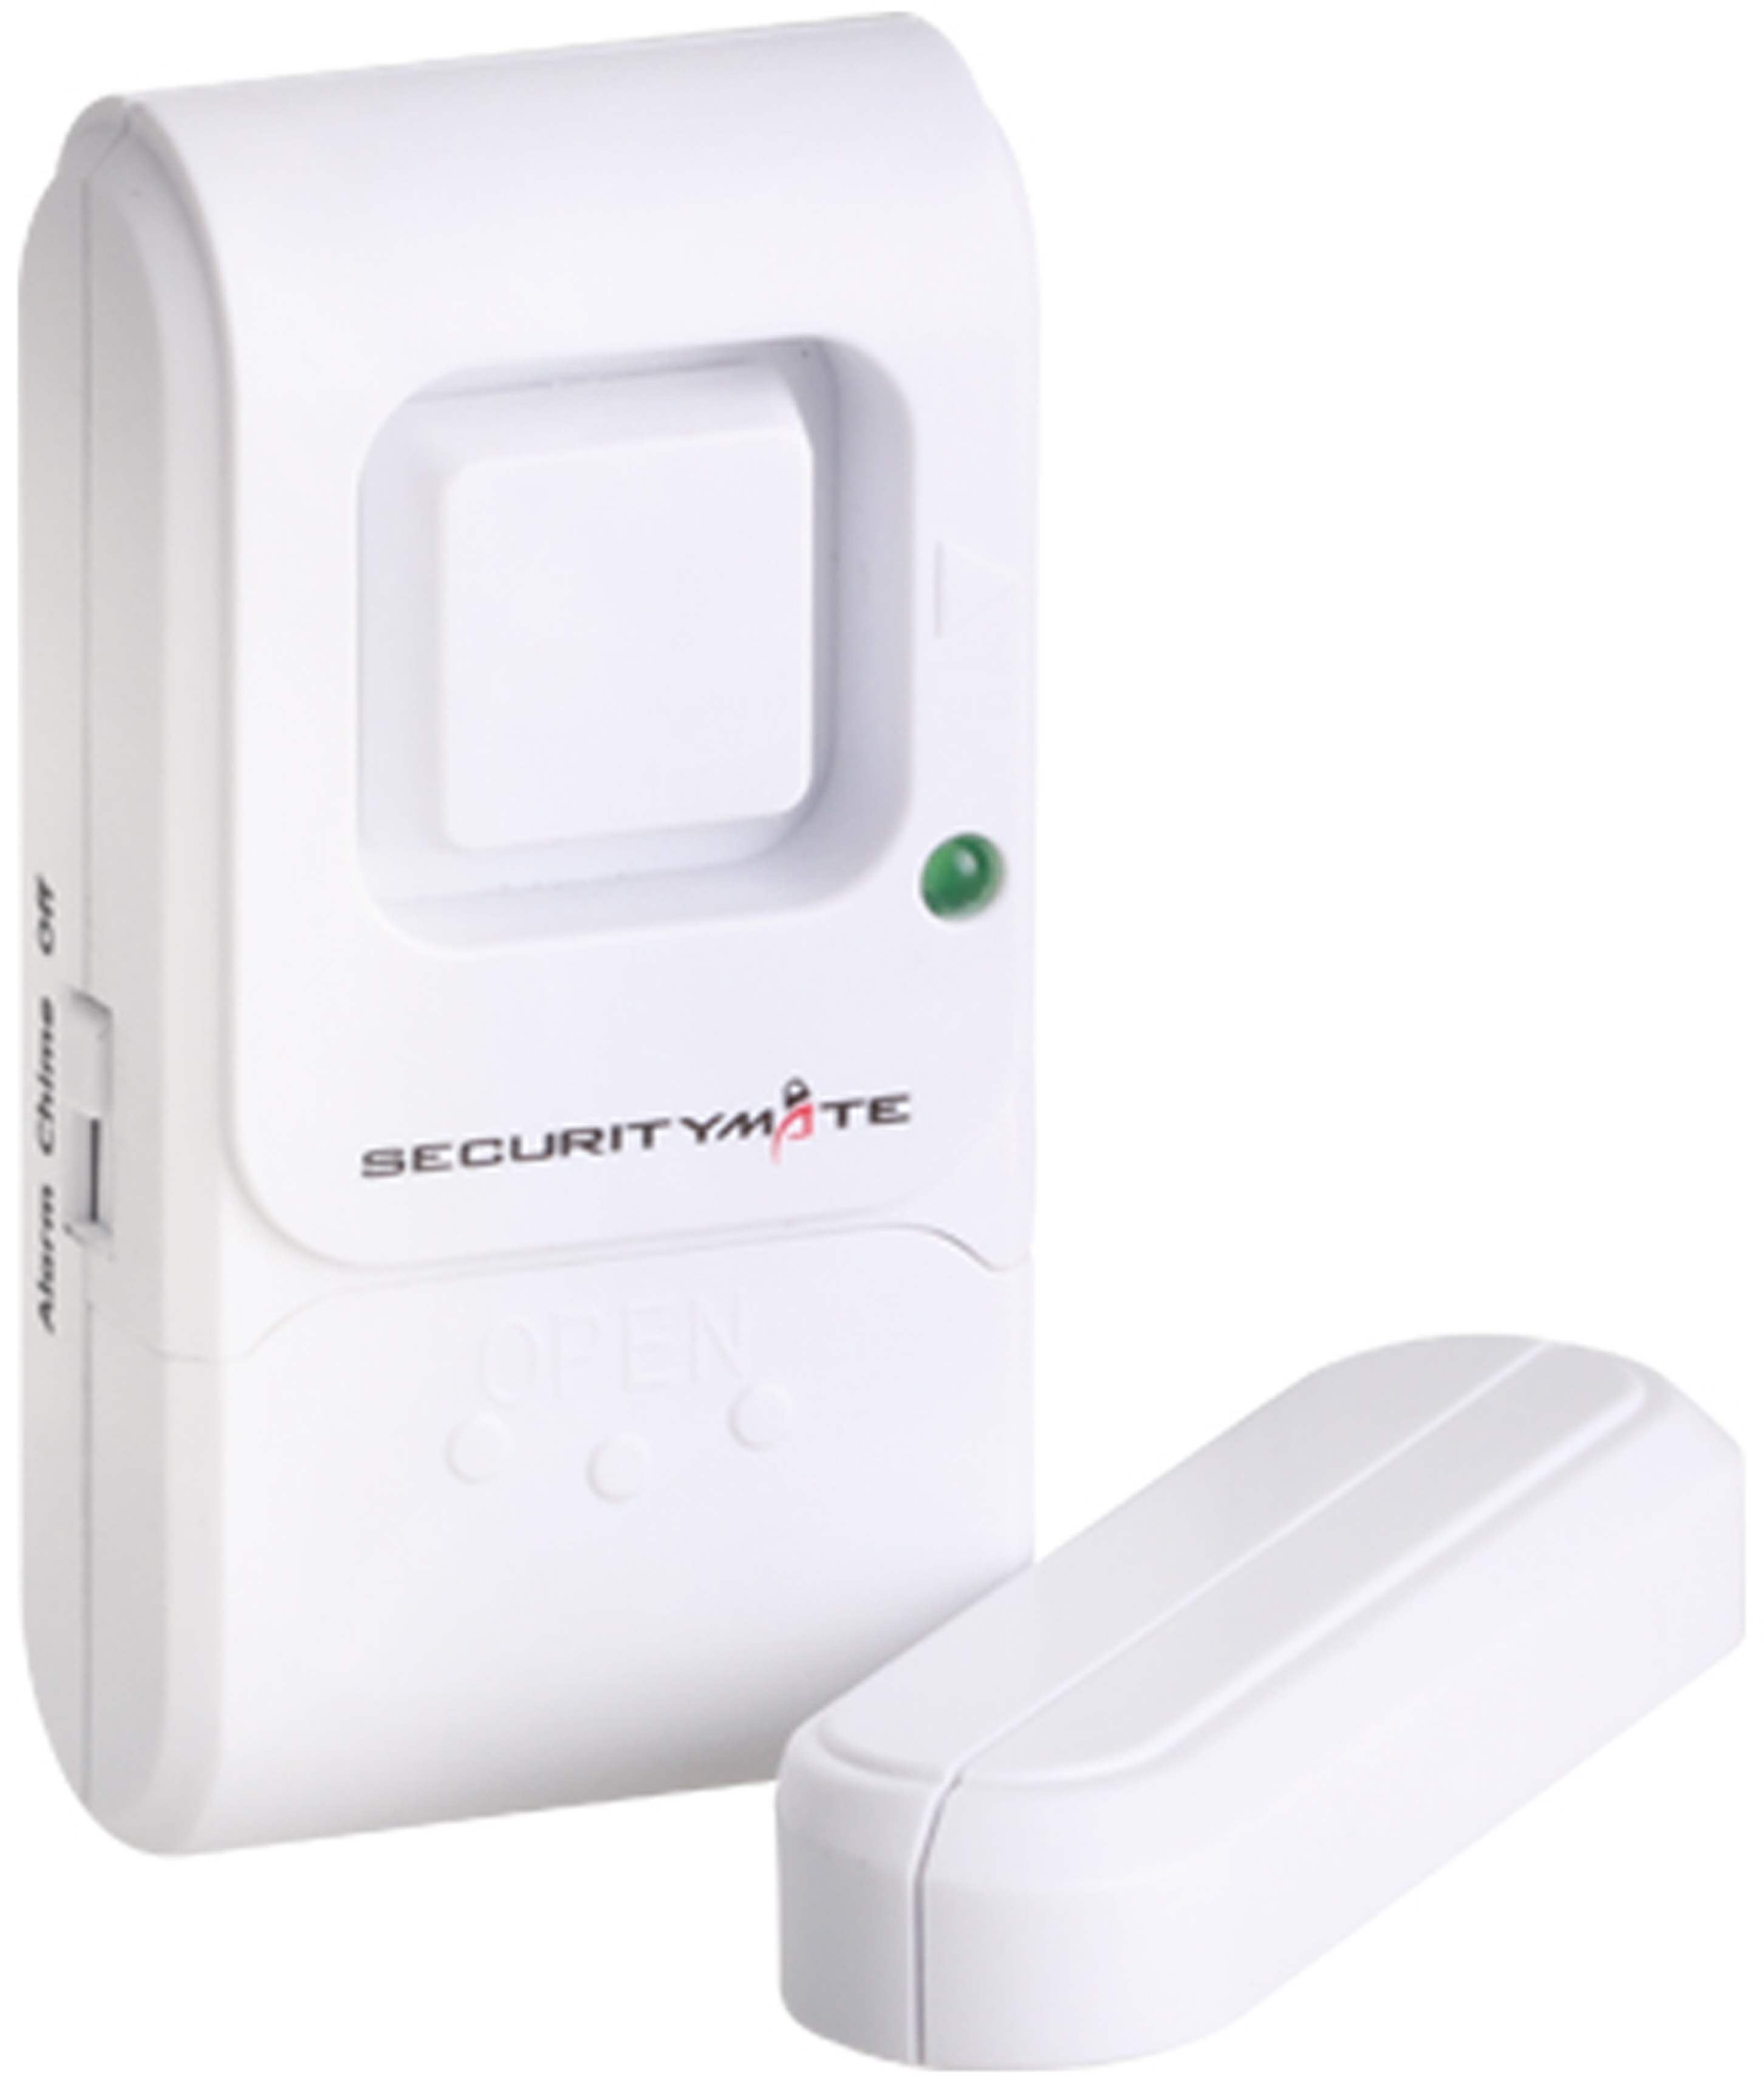 Magnetic sensor alarm doors/windows. Operating frequency: 433MHz. 105dB alarm siren when the window or door is opened. Easy access OFF/CHIME/ALARM switch. Easy to install, compact design. Low battery TEST BUTTON. (4 x LR44 batteries included).